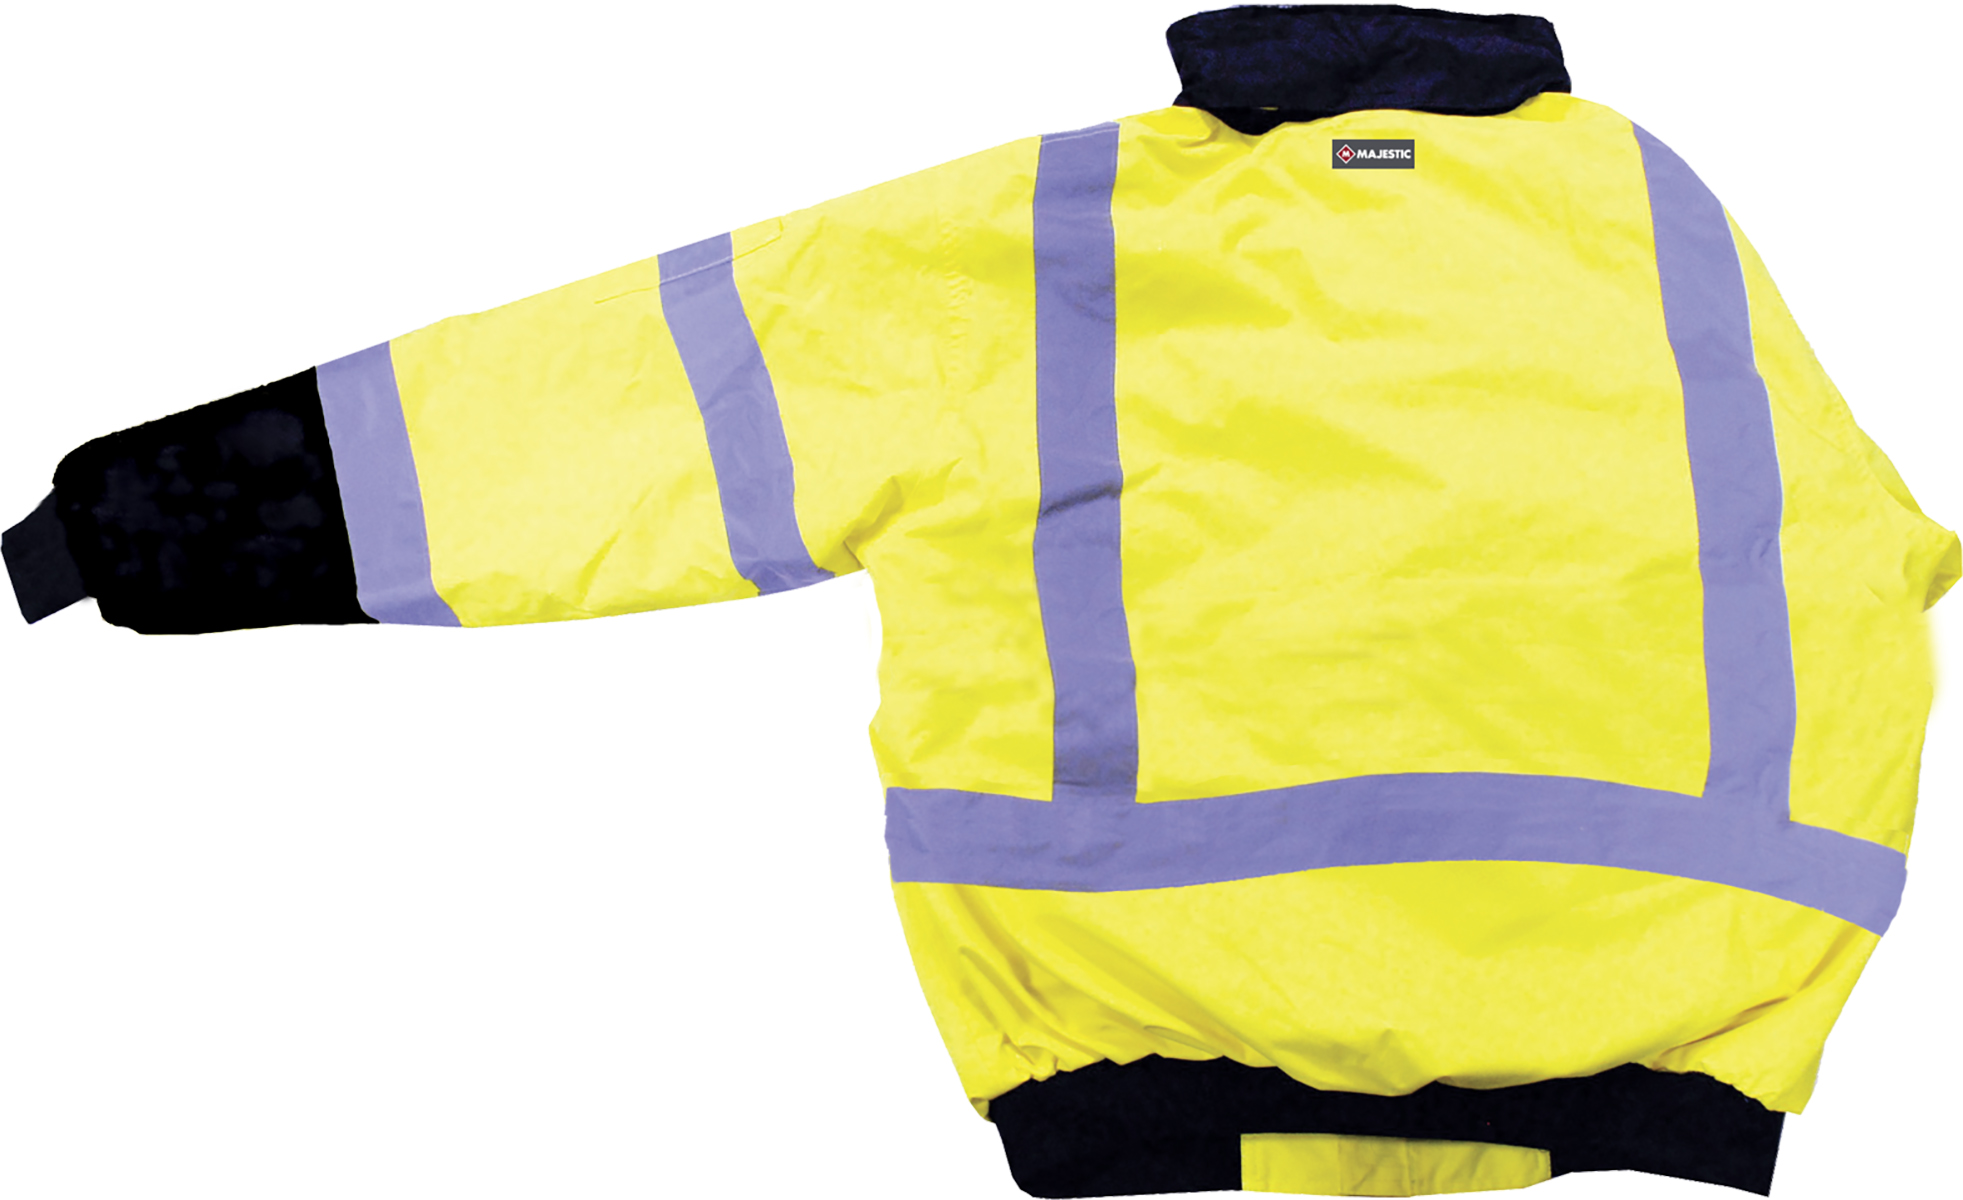 Picture of Majestic 75-1313 Hi-Viz Waterproof Jacket with Quilted Liner, ANSI 3